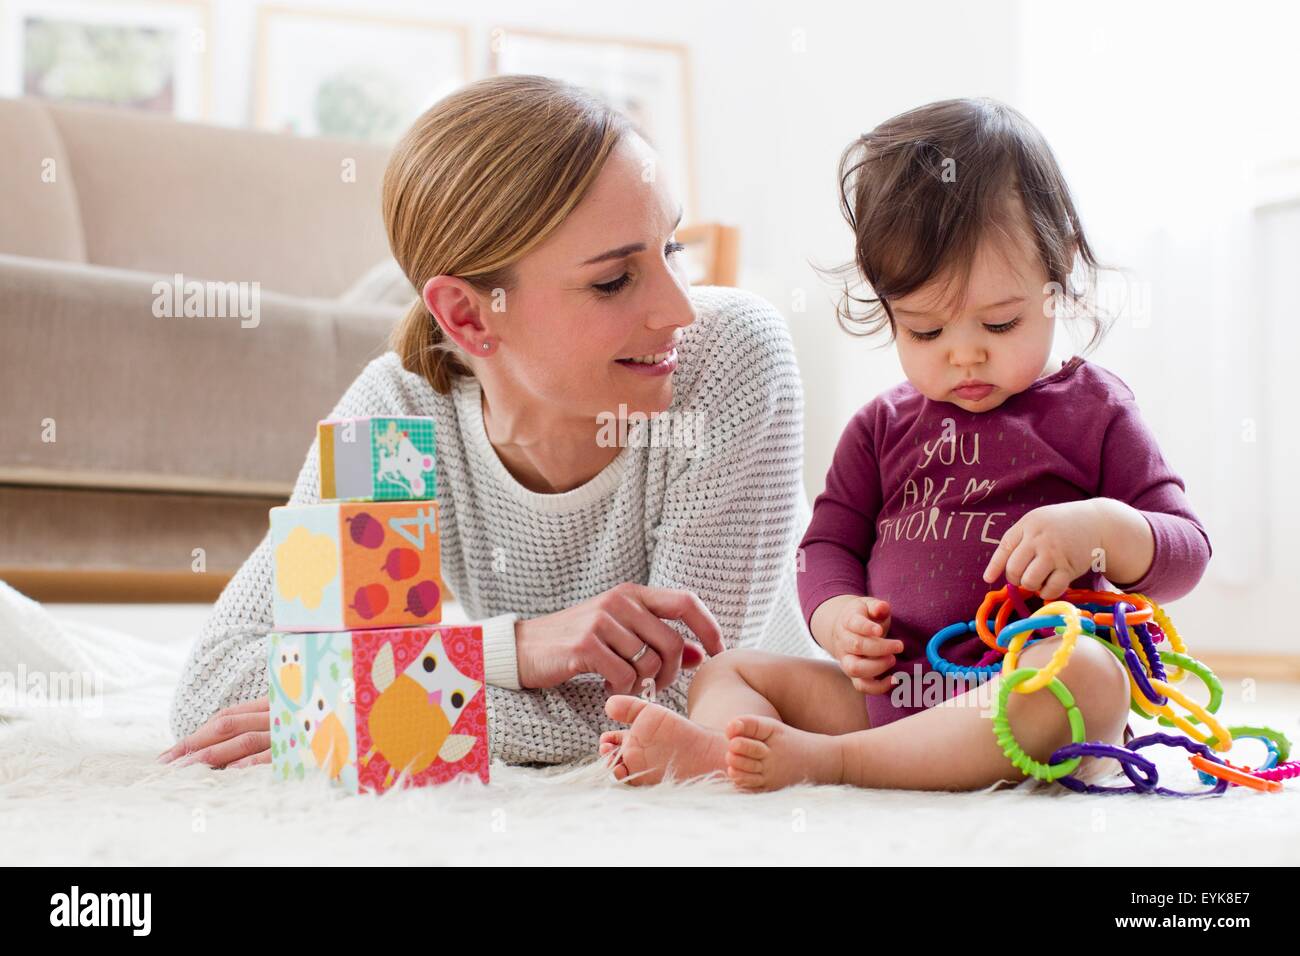 Mother and baby boy, at home, playing together Stock Photo